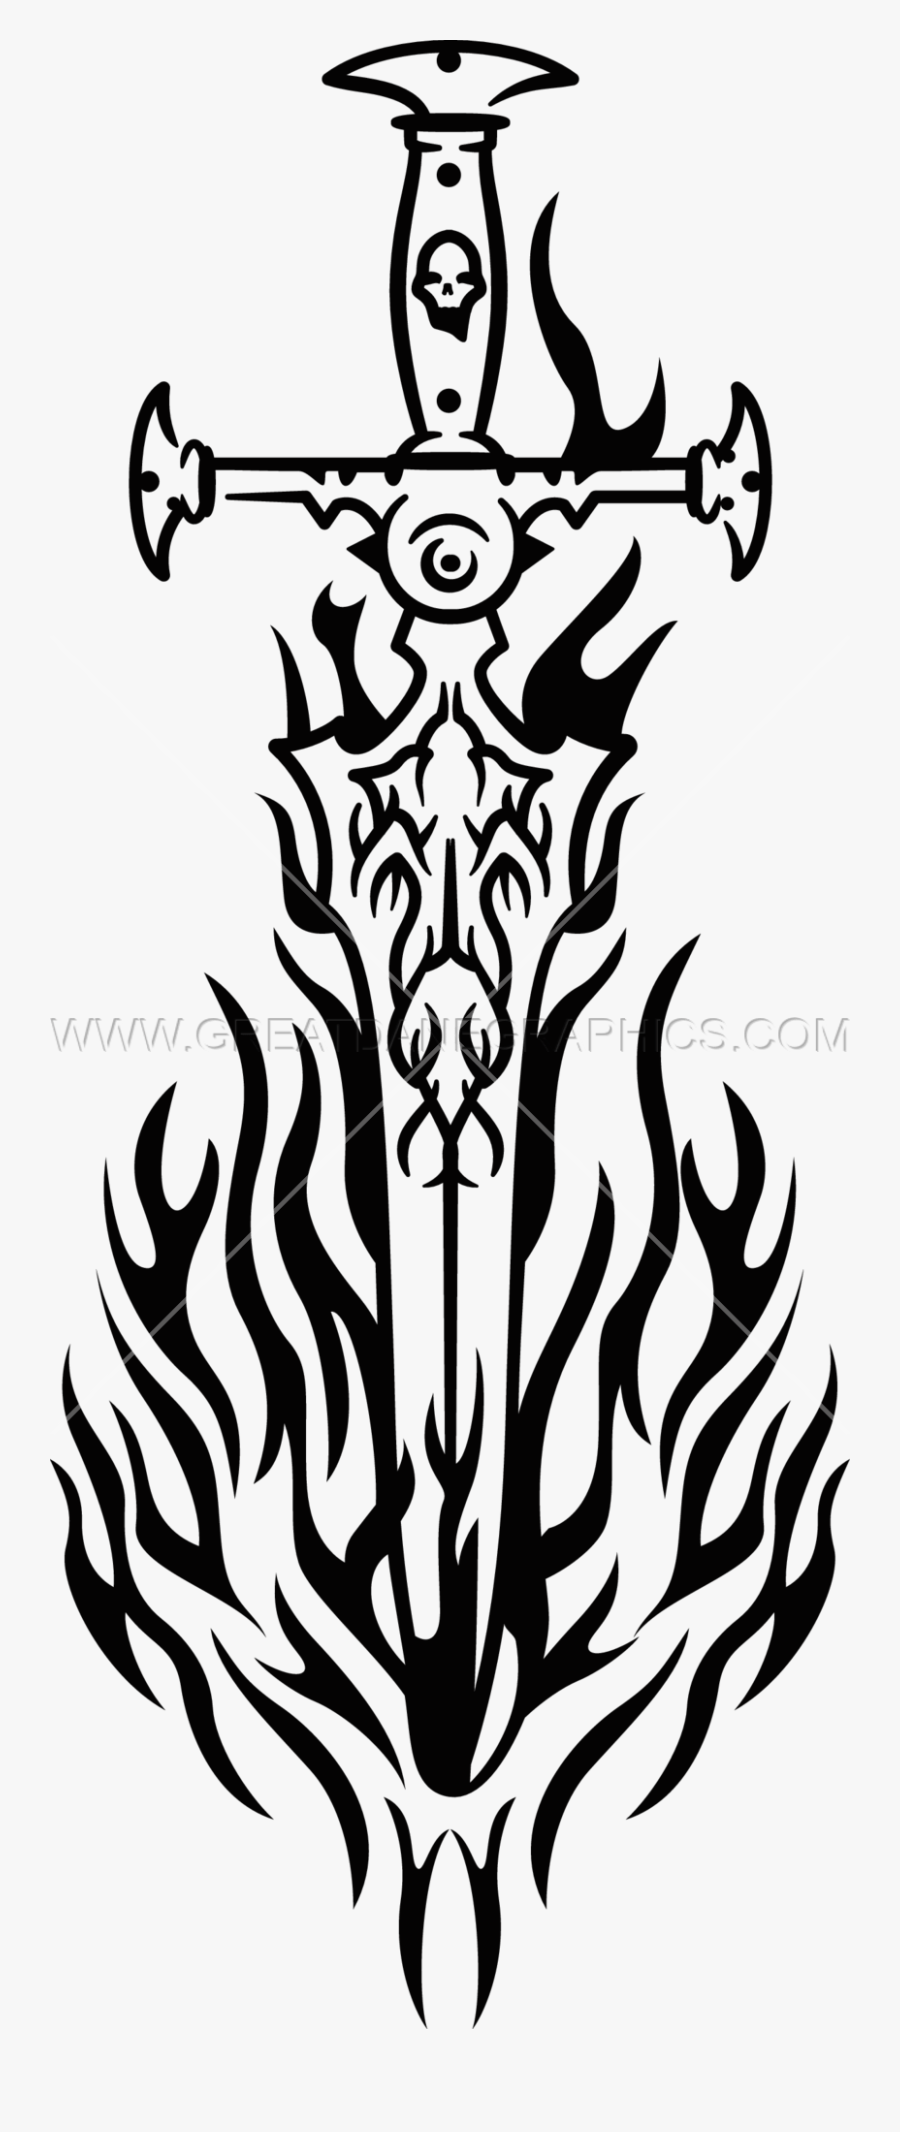 Sword With Fire Clipart, Transparent Clipart